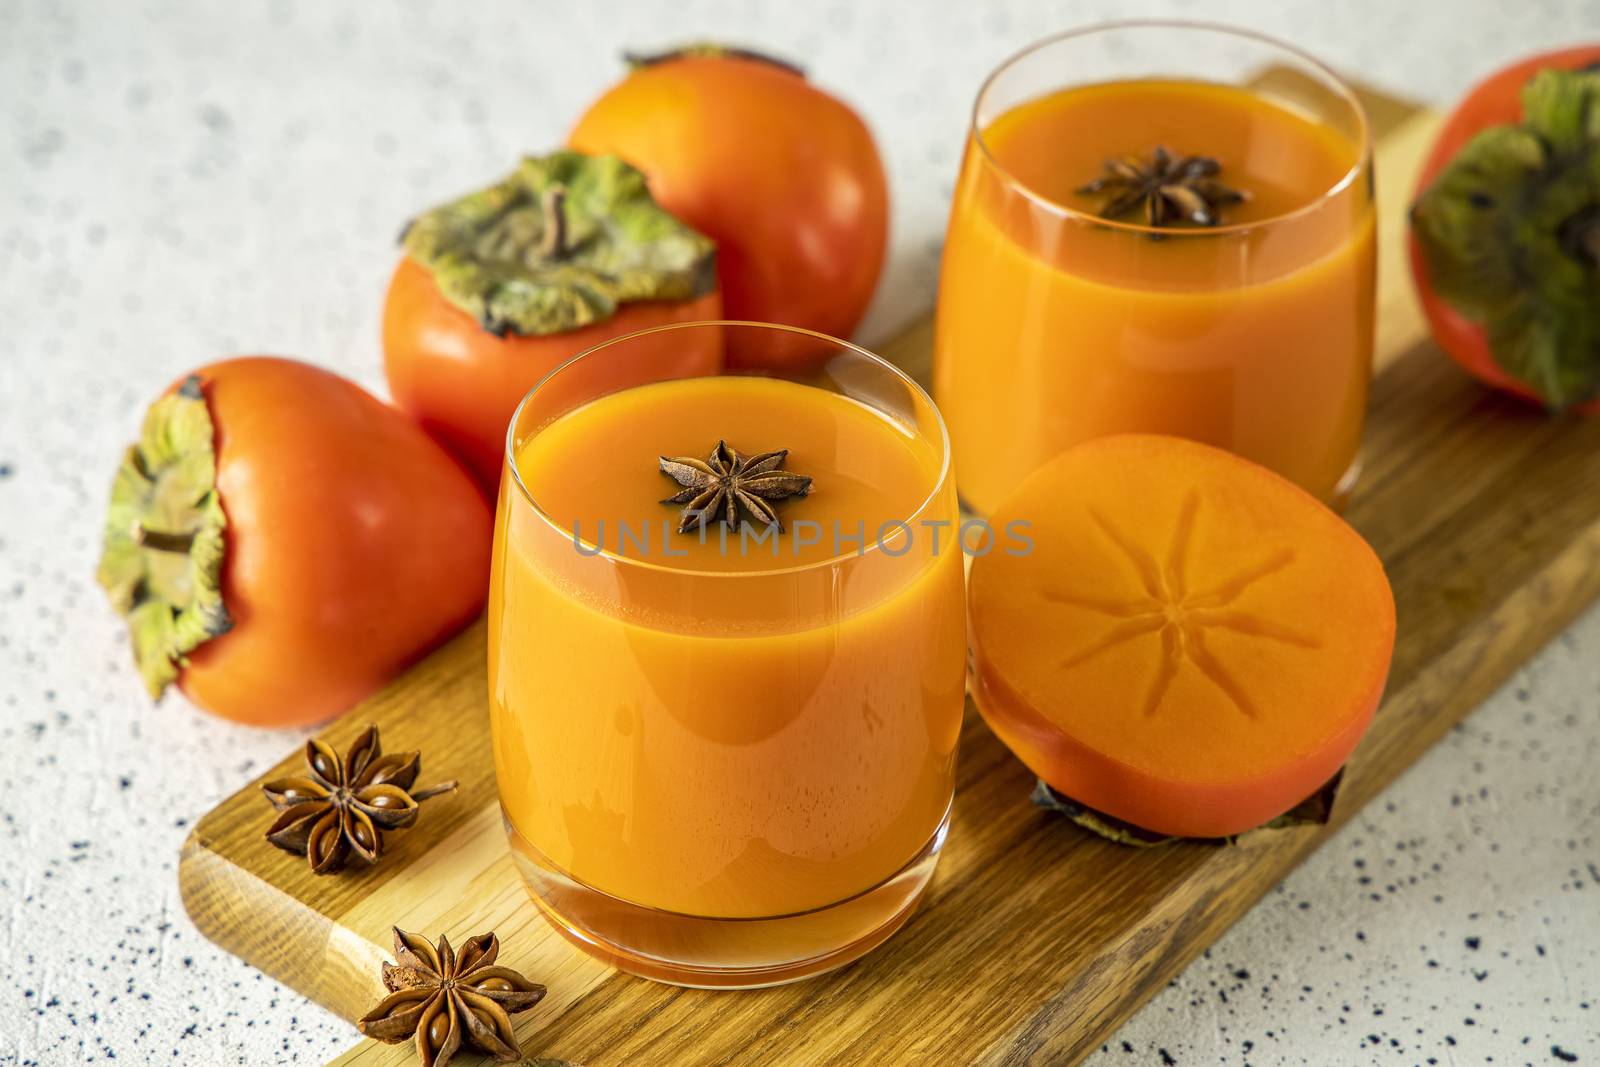 Two glasses of fresh healthy persimmon smoothie with anise stars on cutting wooden board, gray concrete background, selective focus, copy space.